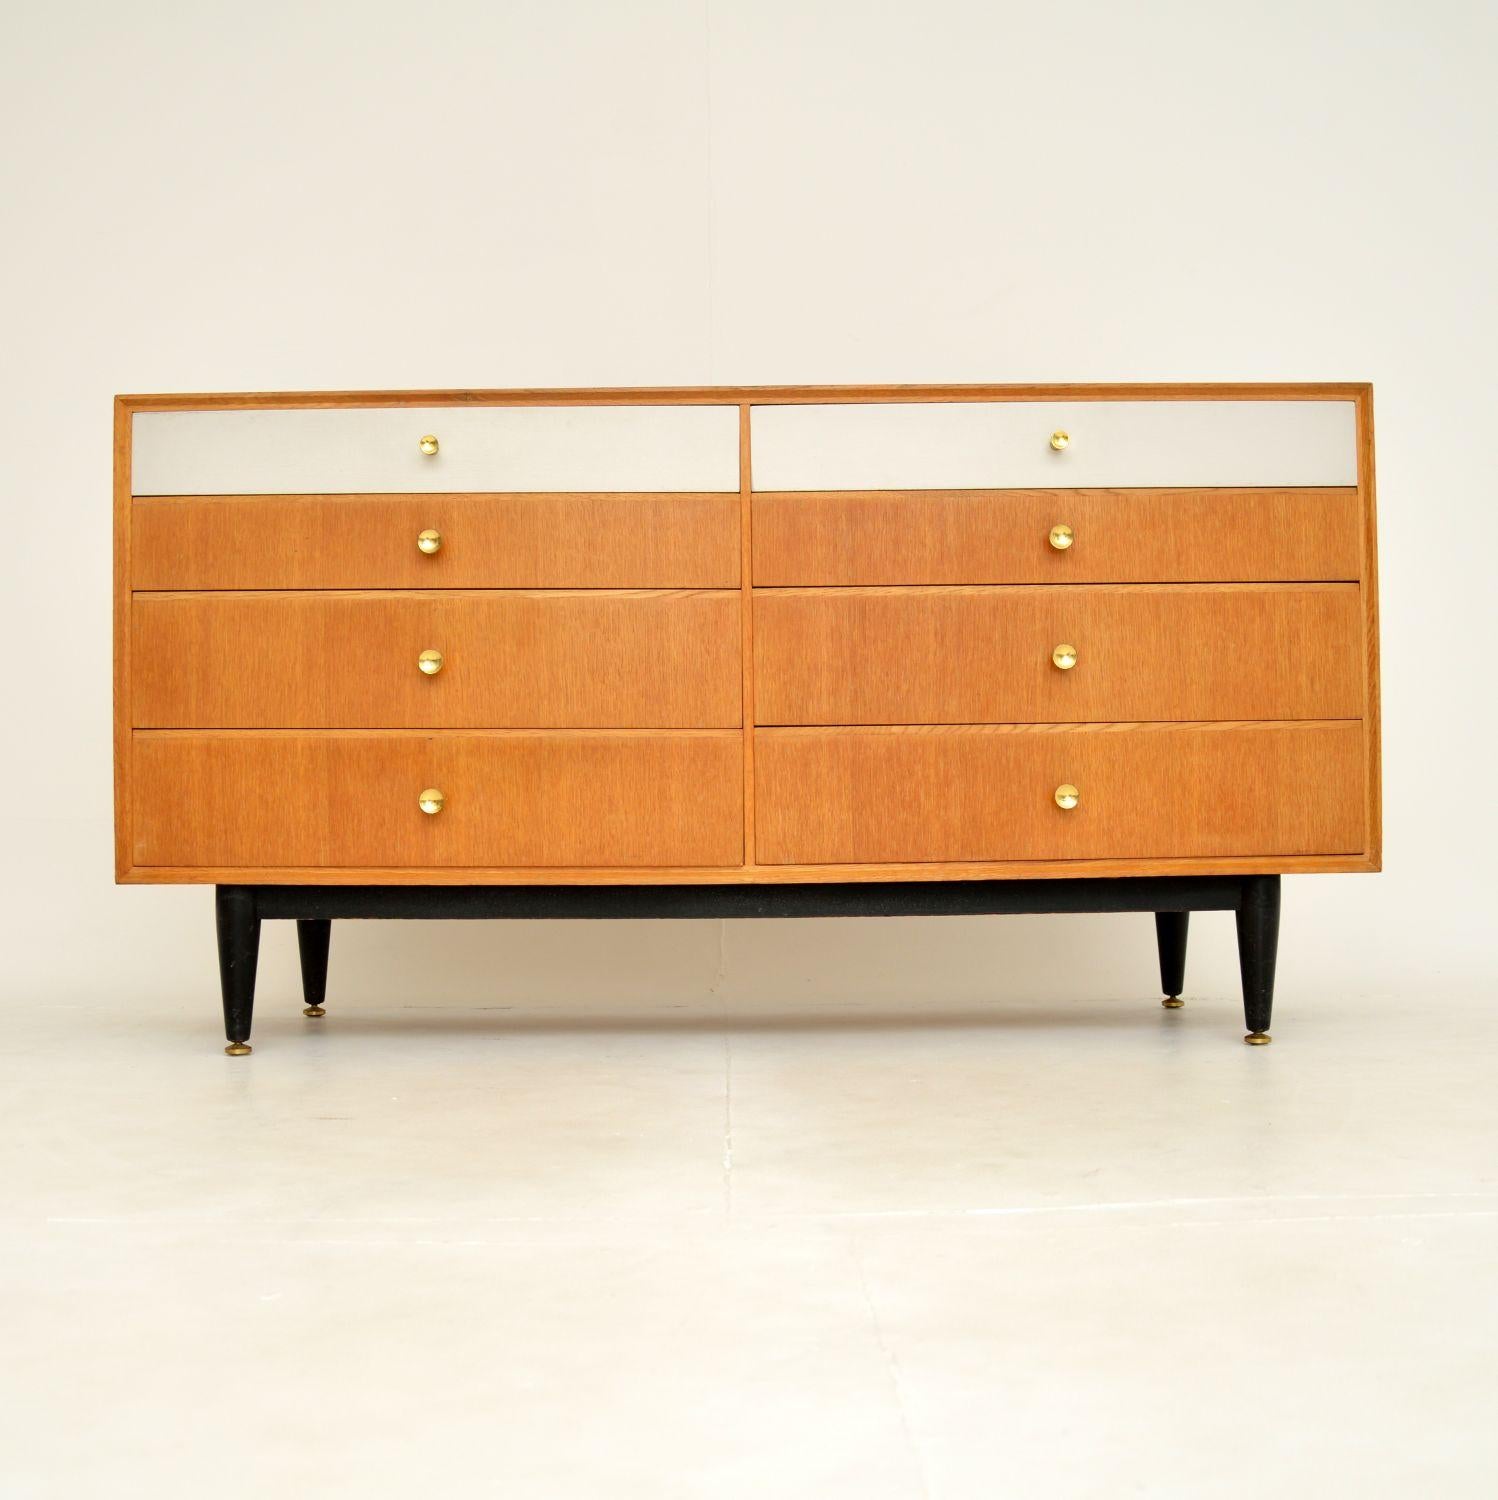 A very stylish and well made sideboard / chest of drawers in light oak. This was made in England by Meredew, it dates from around the 1950-60’s.

The quality is excellent, this is beautifully styled and is a very useful item. There is lots of